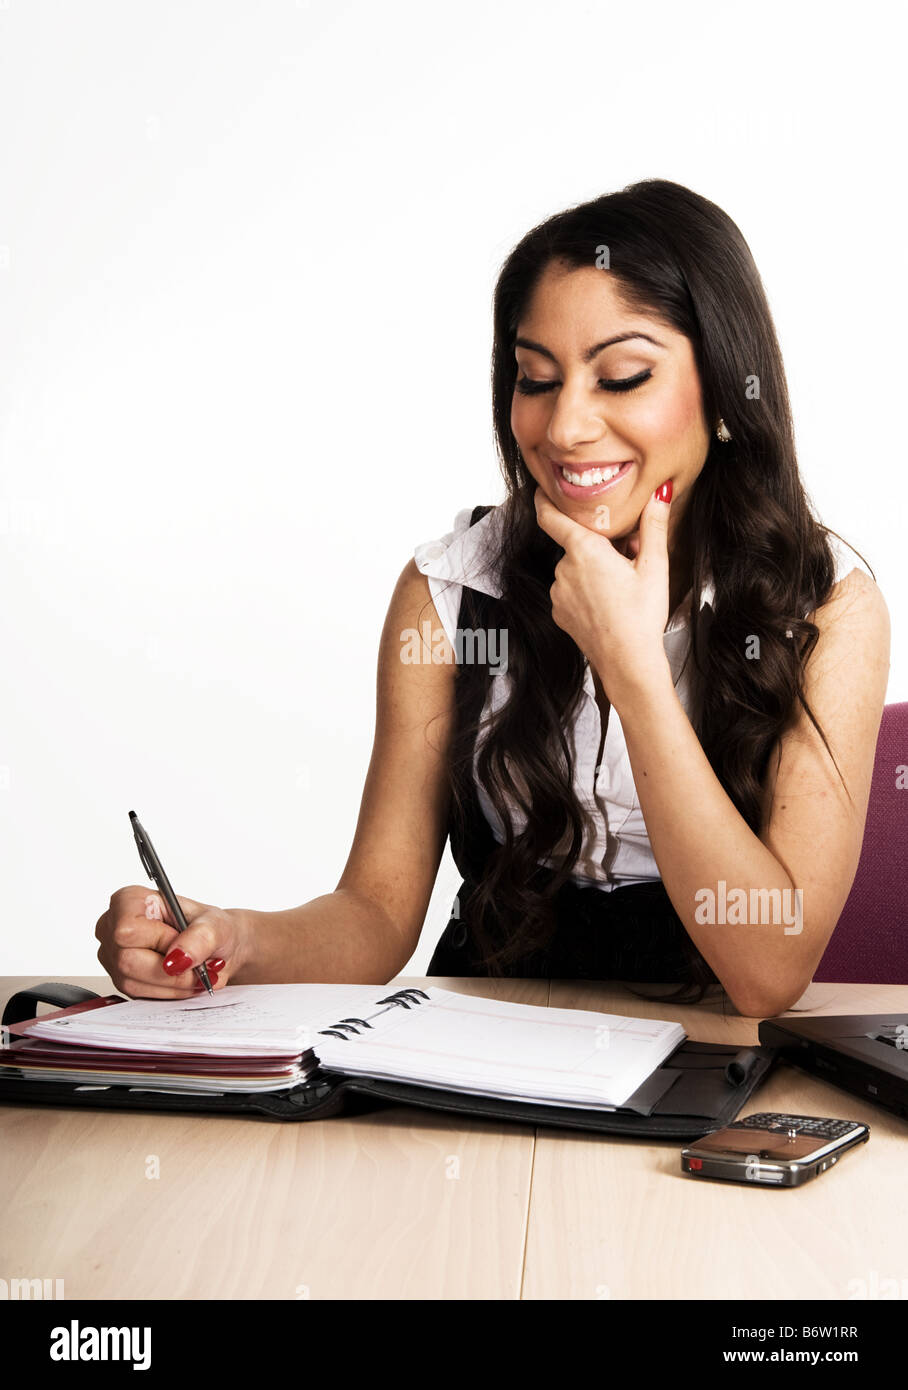 Business Woman working on her calendar Banque D'Images